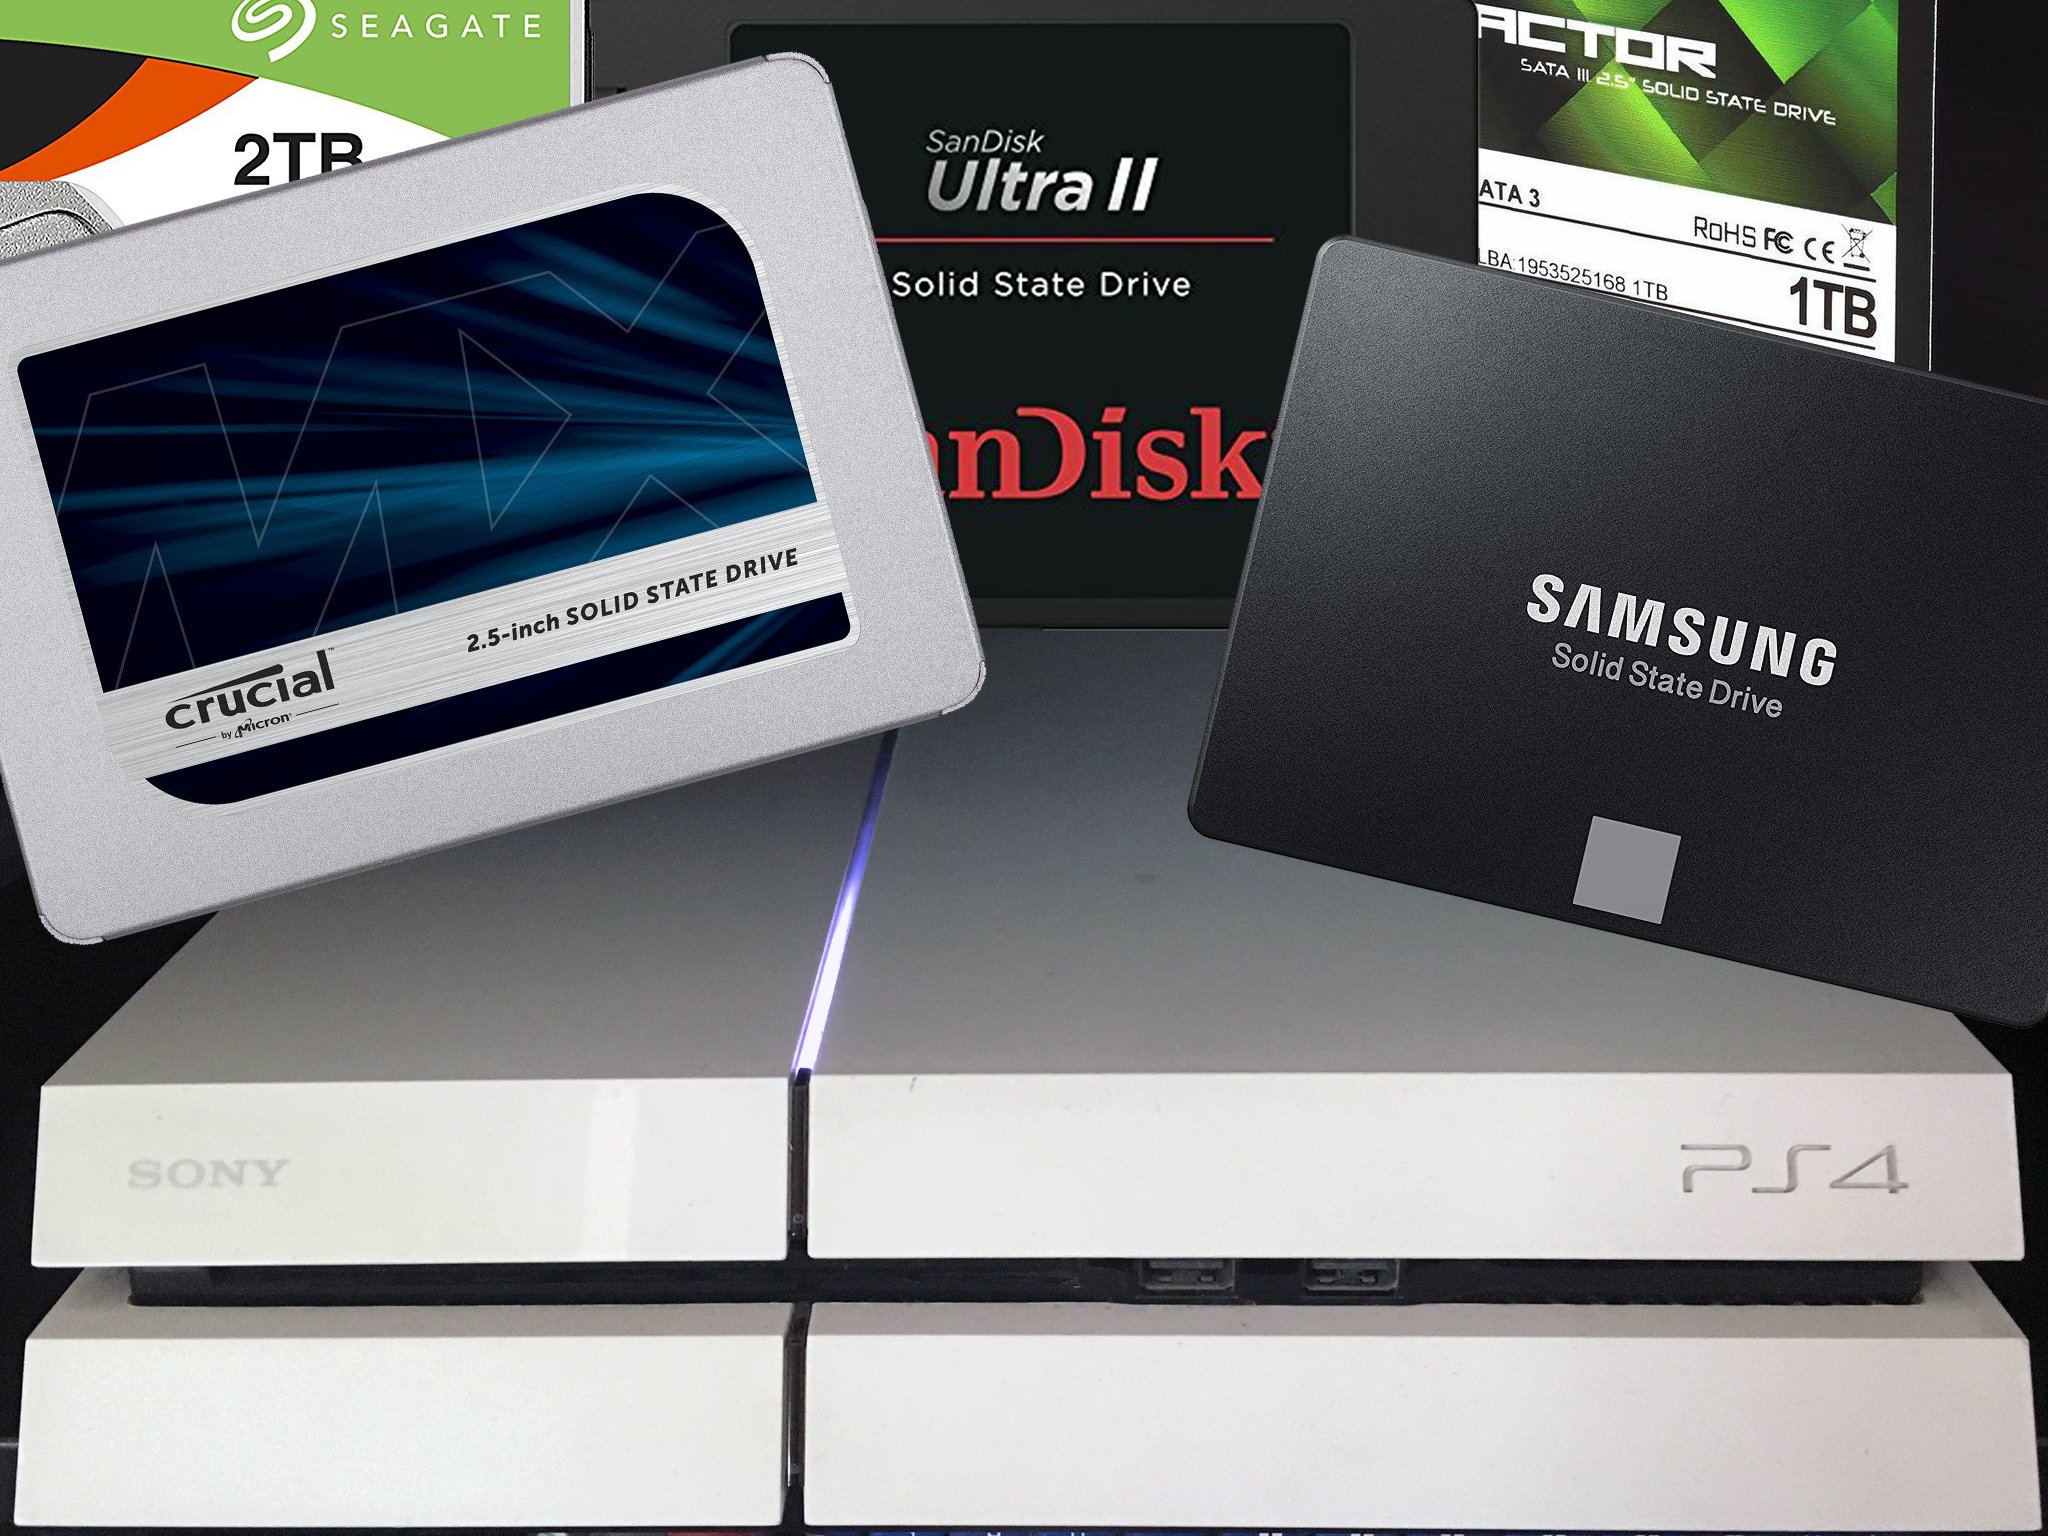 Best replacement SSD for PS4 in 2021